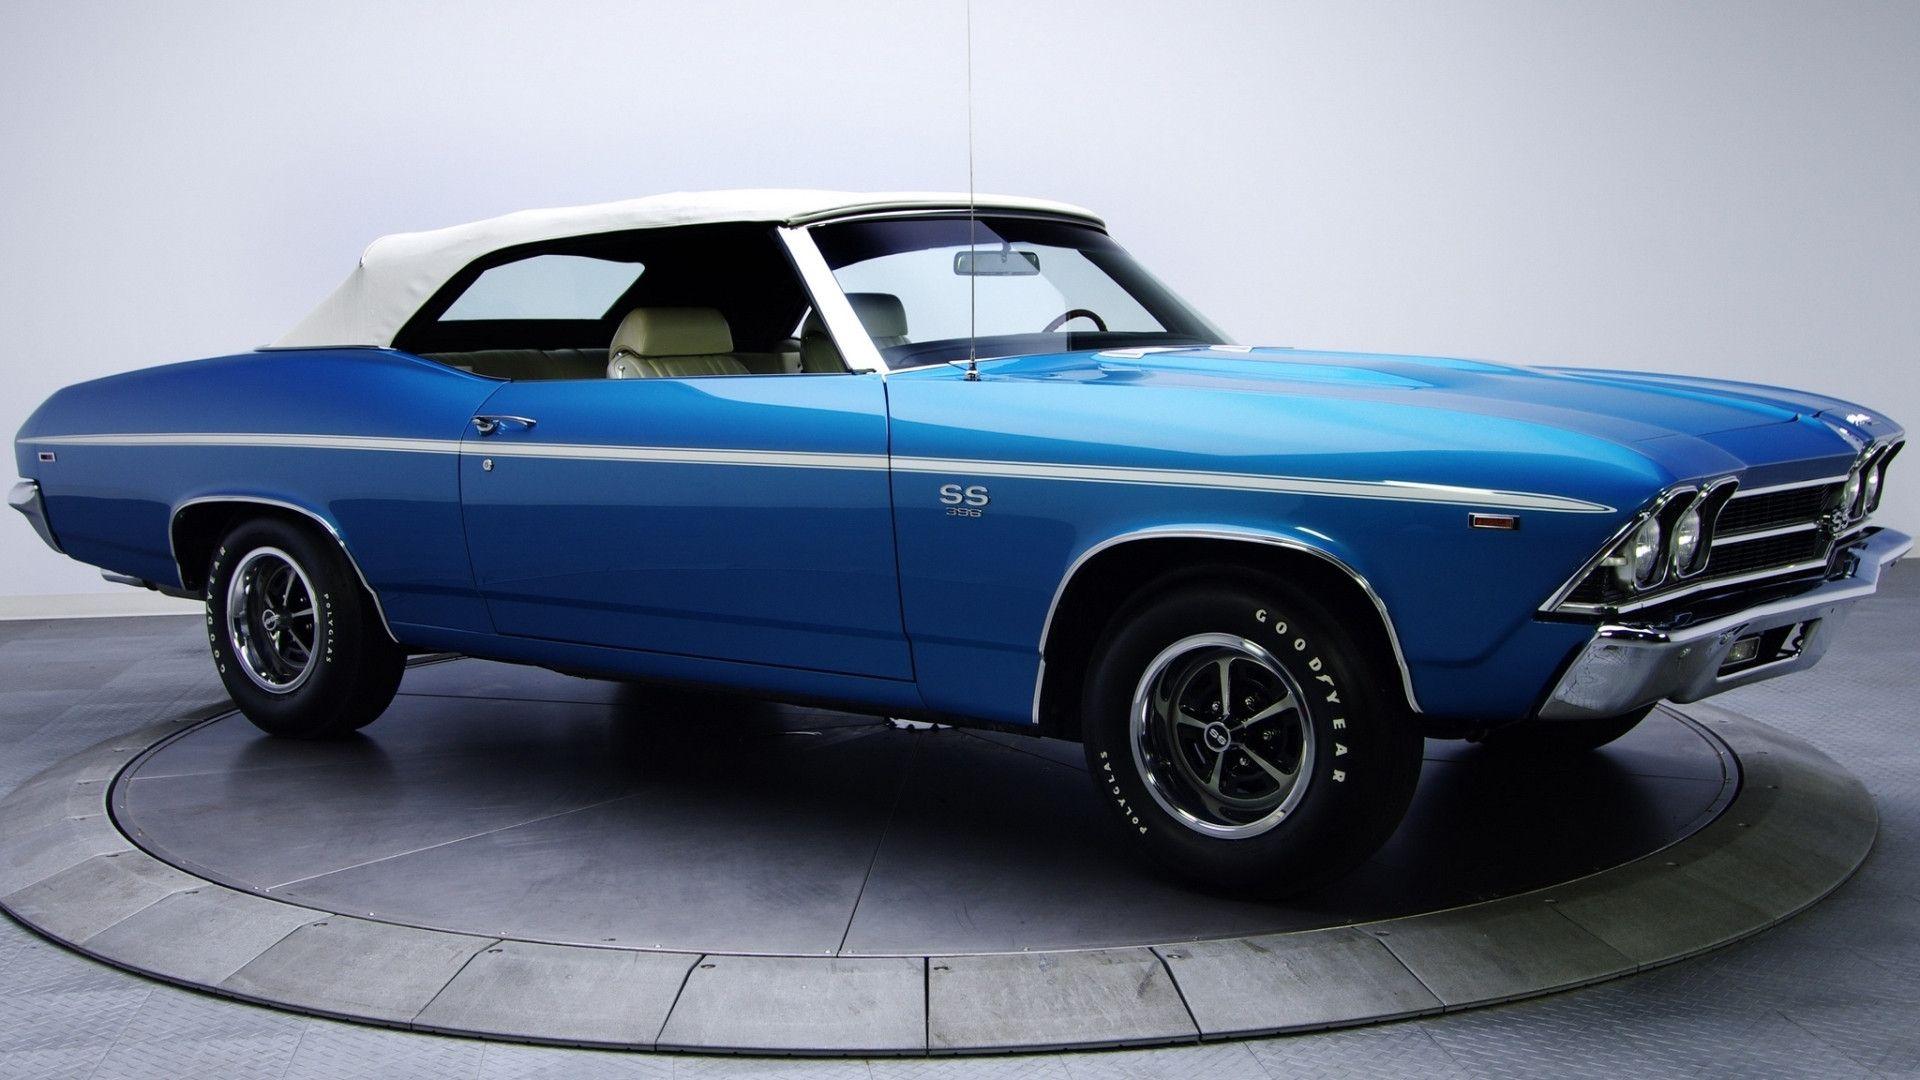 Chevelle SS Wallpapers 1920x1080